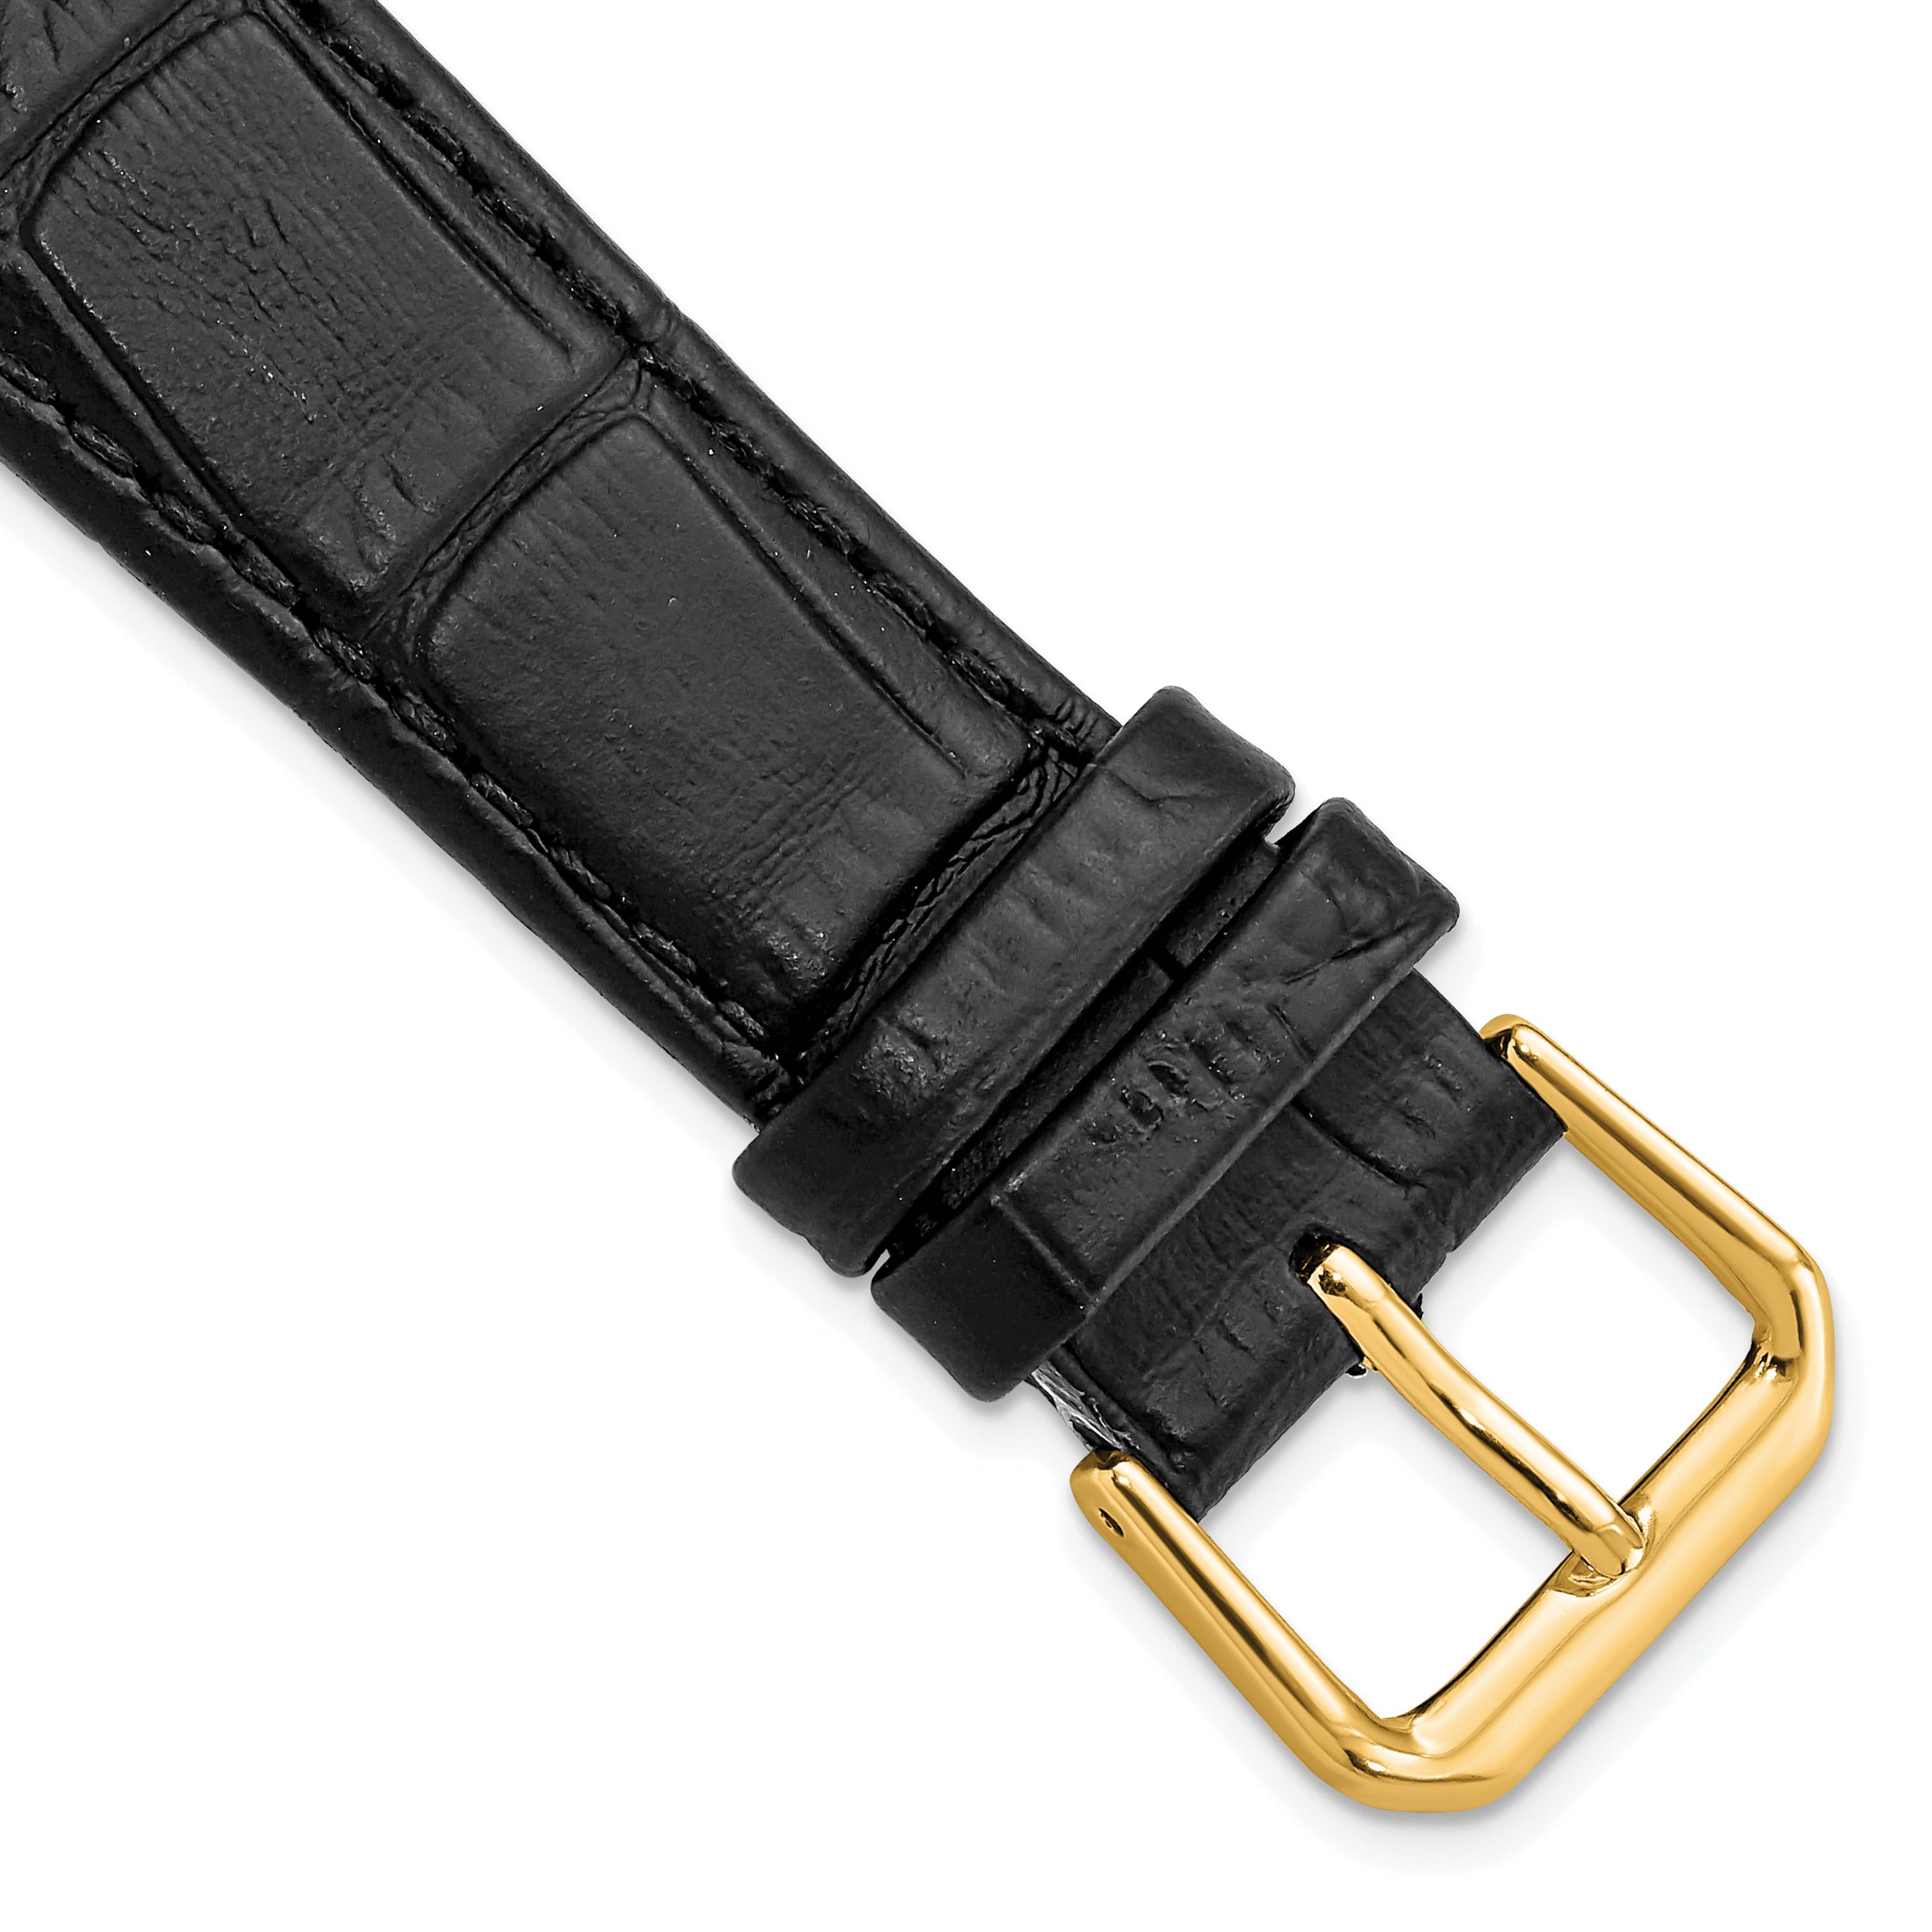 DeBeer 19mm Black Matte Wild Alligator Grain Leather with Gold-tone Buckle 7.5 inch Watch Band